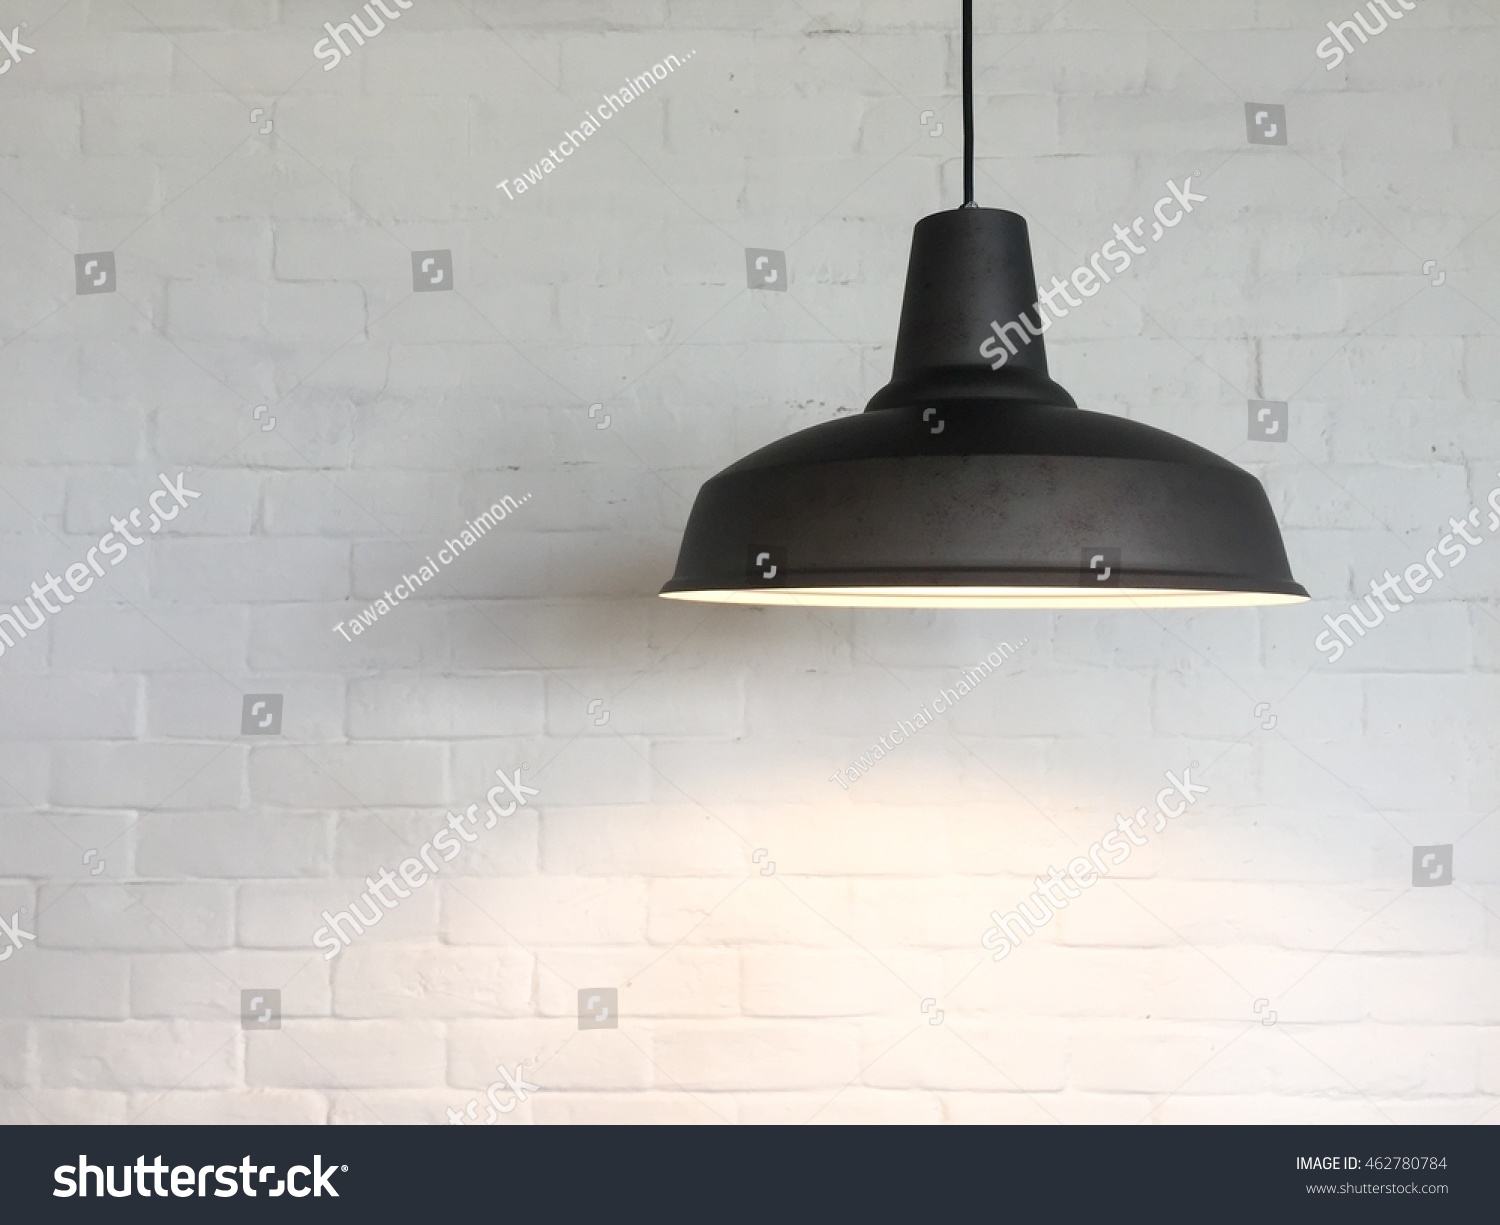 The Ceiling Fixture on brick wall background. #462780784